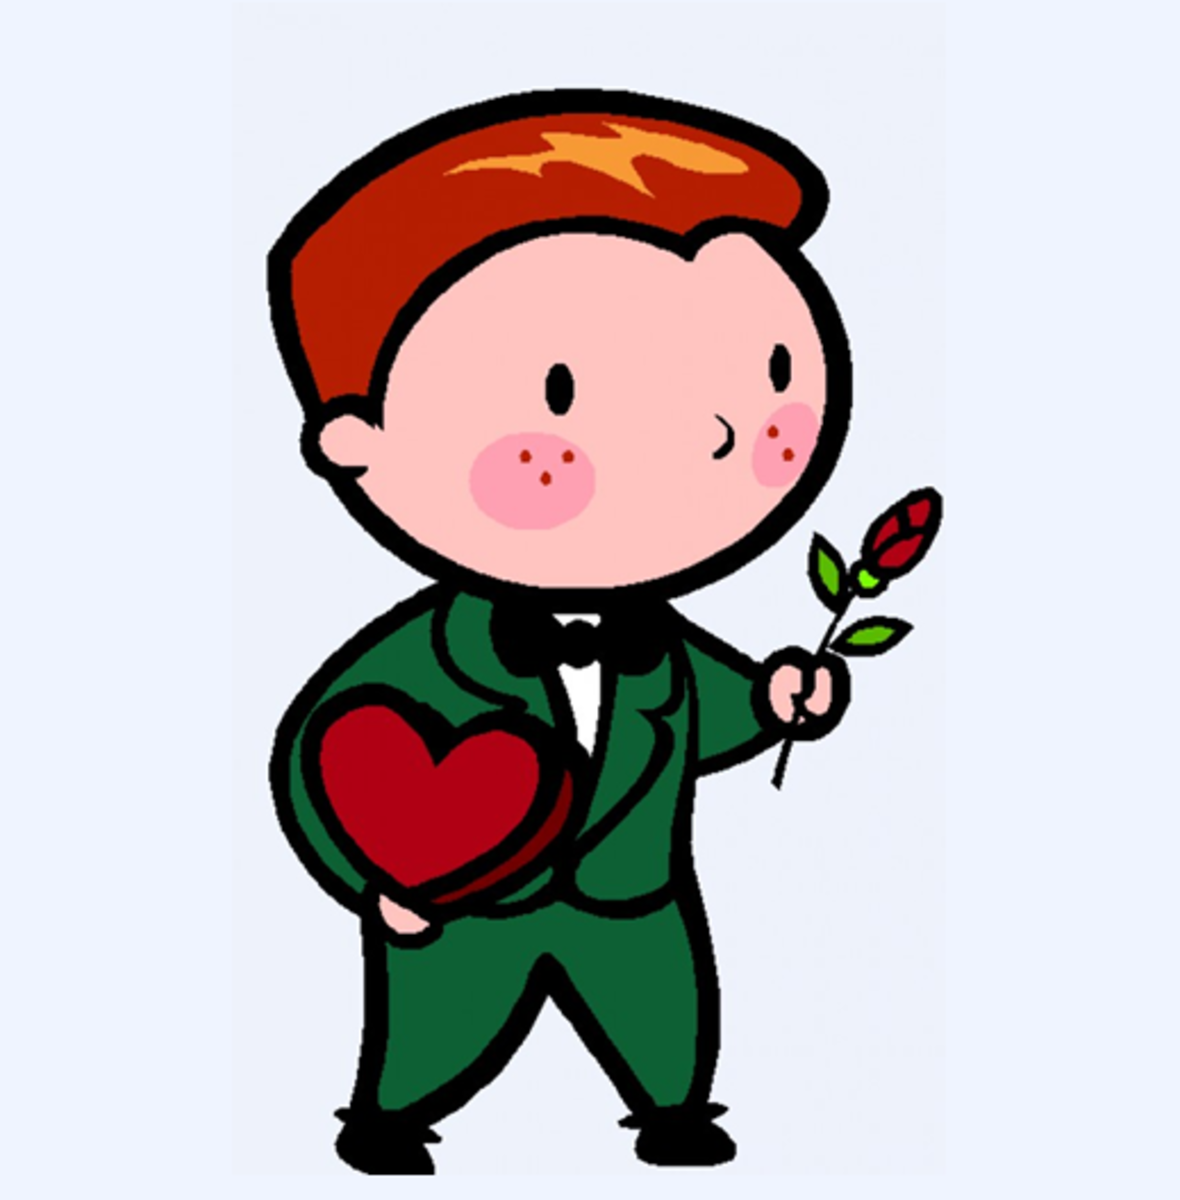 Man with Valentine's Day Candy and Rosebud